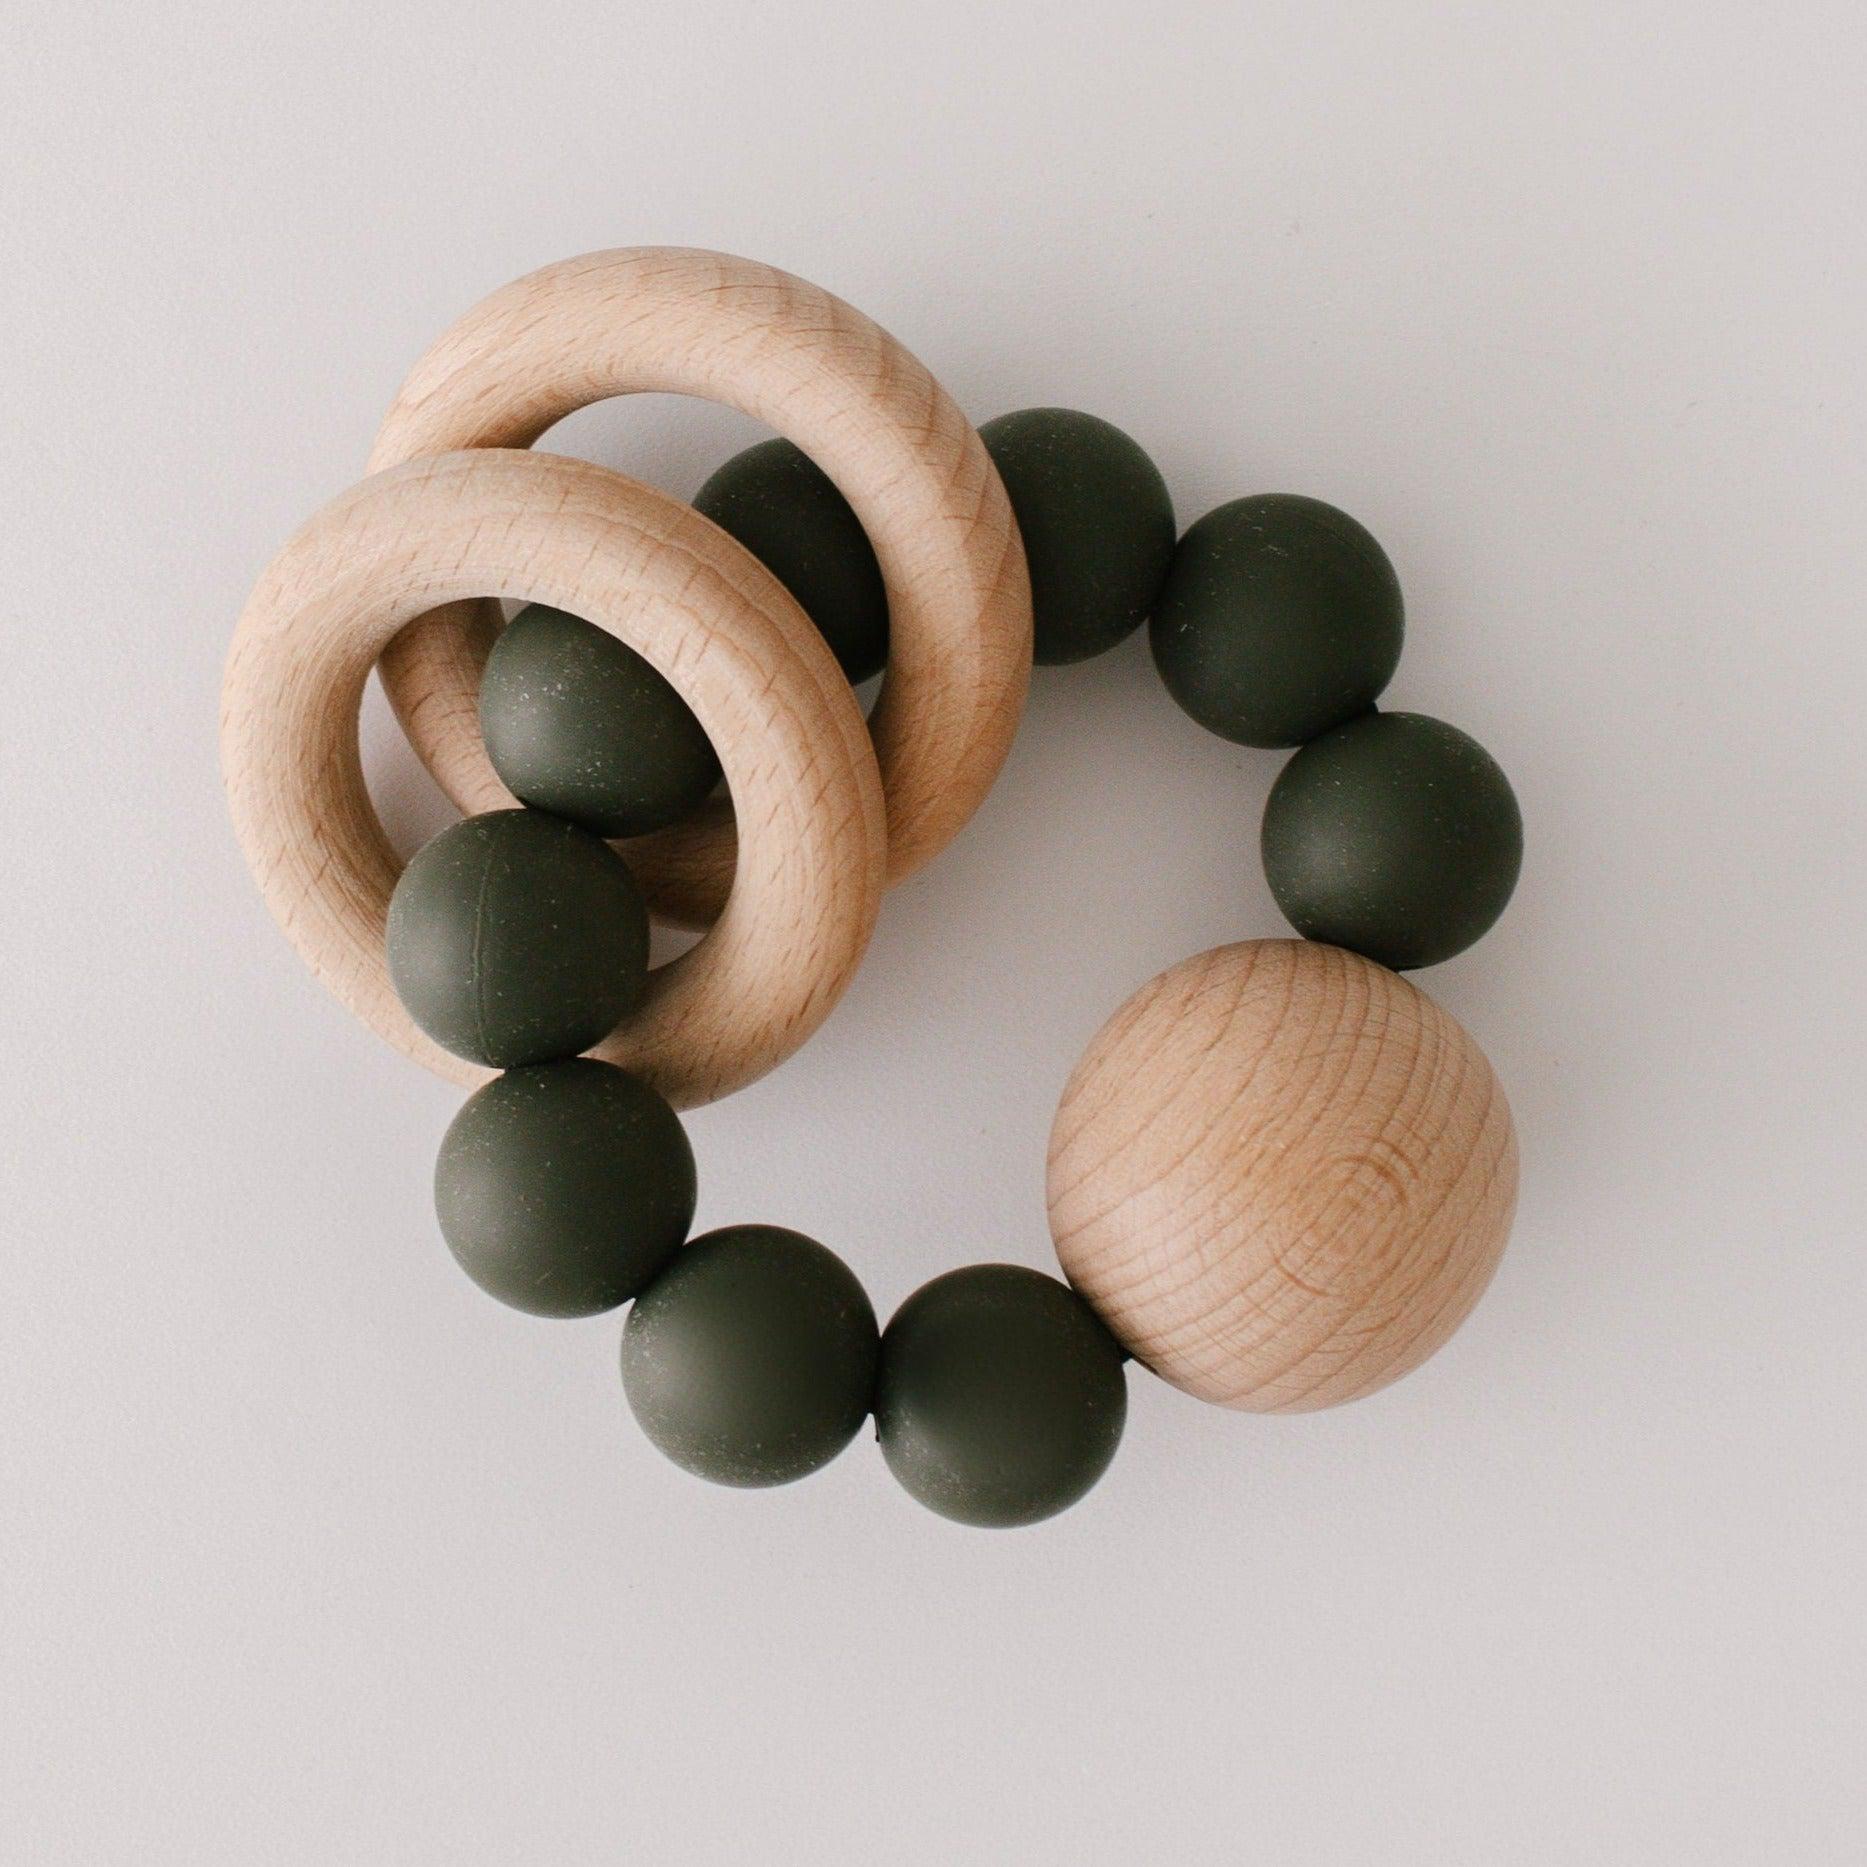 Two untreated wood rings move freely around the circle of 20mm BPA free silicone beads creating a soft rattle when baby shakes. All finished off with massive 35mm untreated beech wood bead.